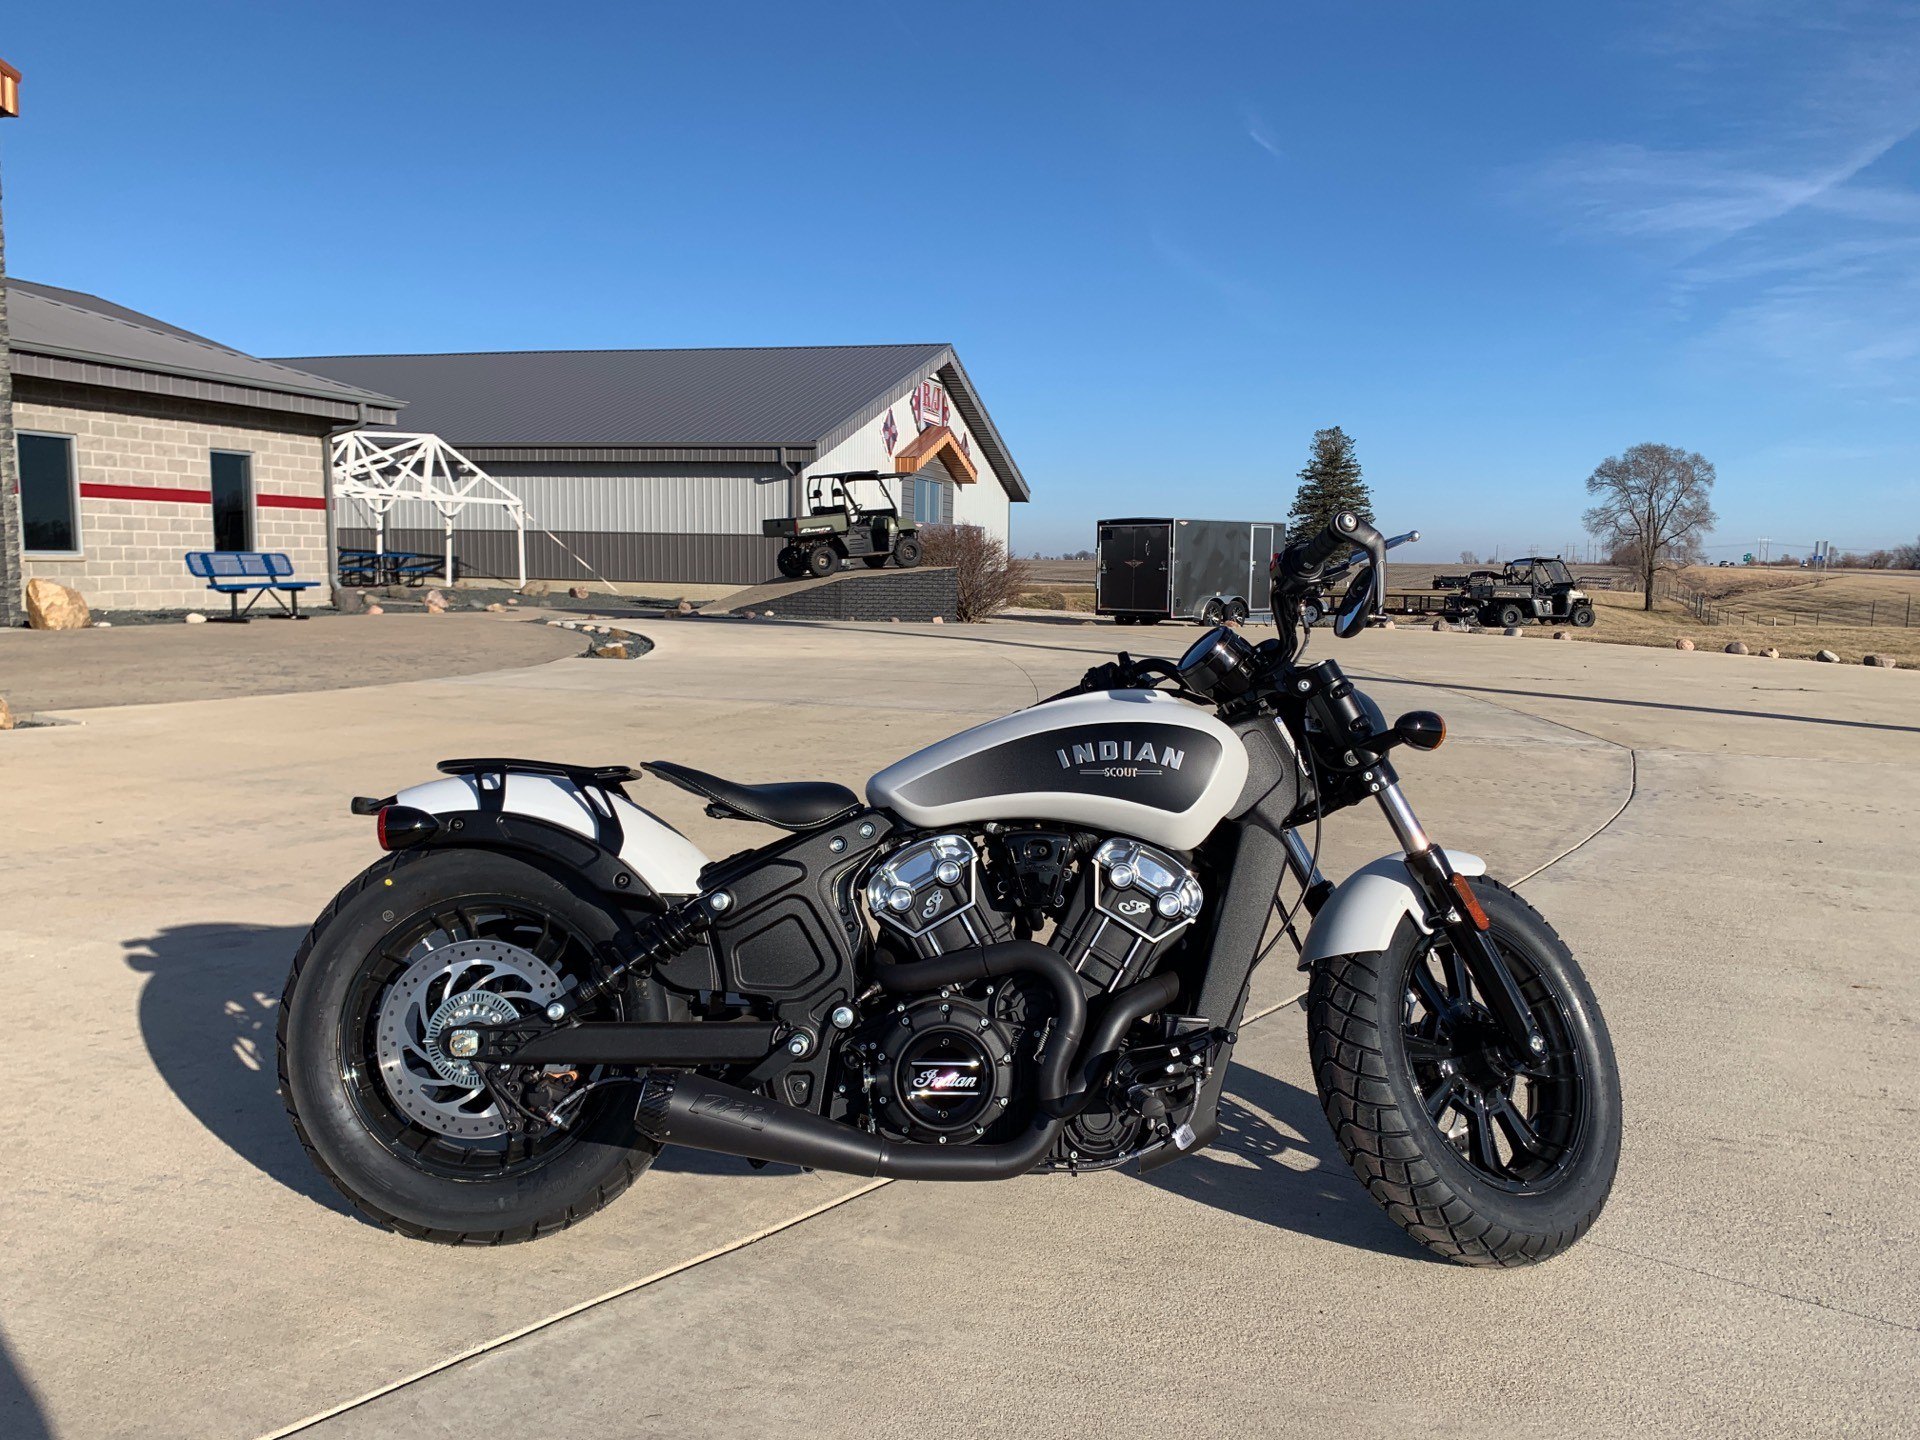 2019 Indian Scout Bobber Abs.